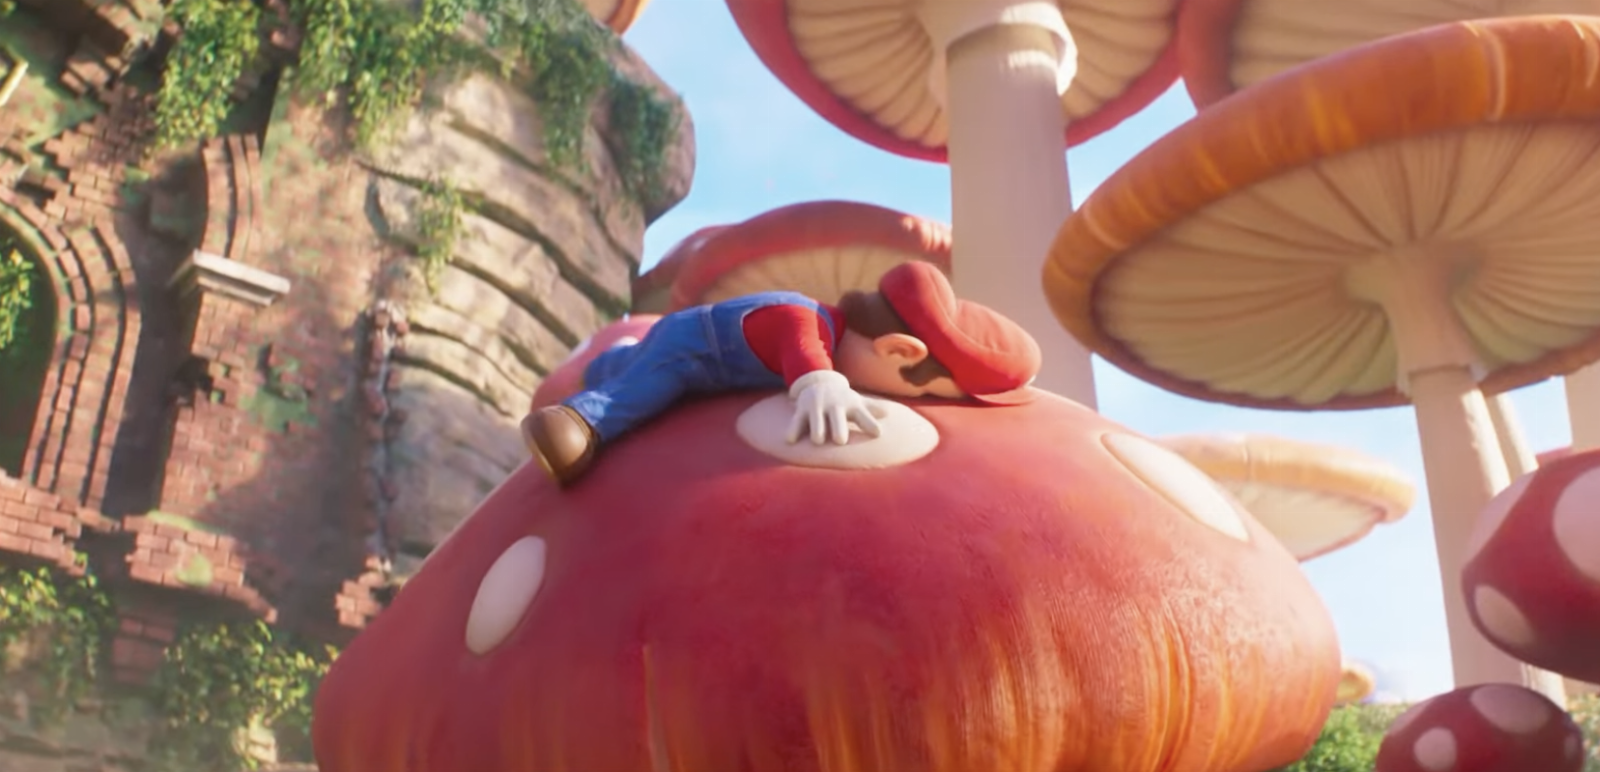 ‘The Super Mario Bros. Movie’ is now streaming on Peacock